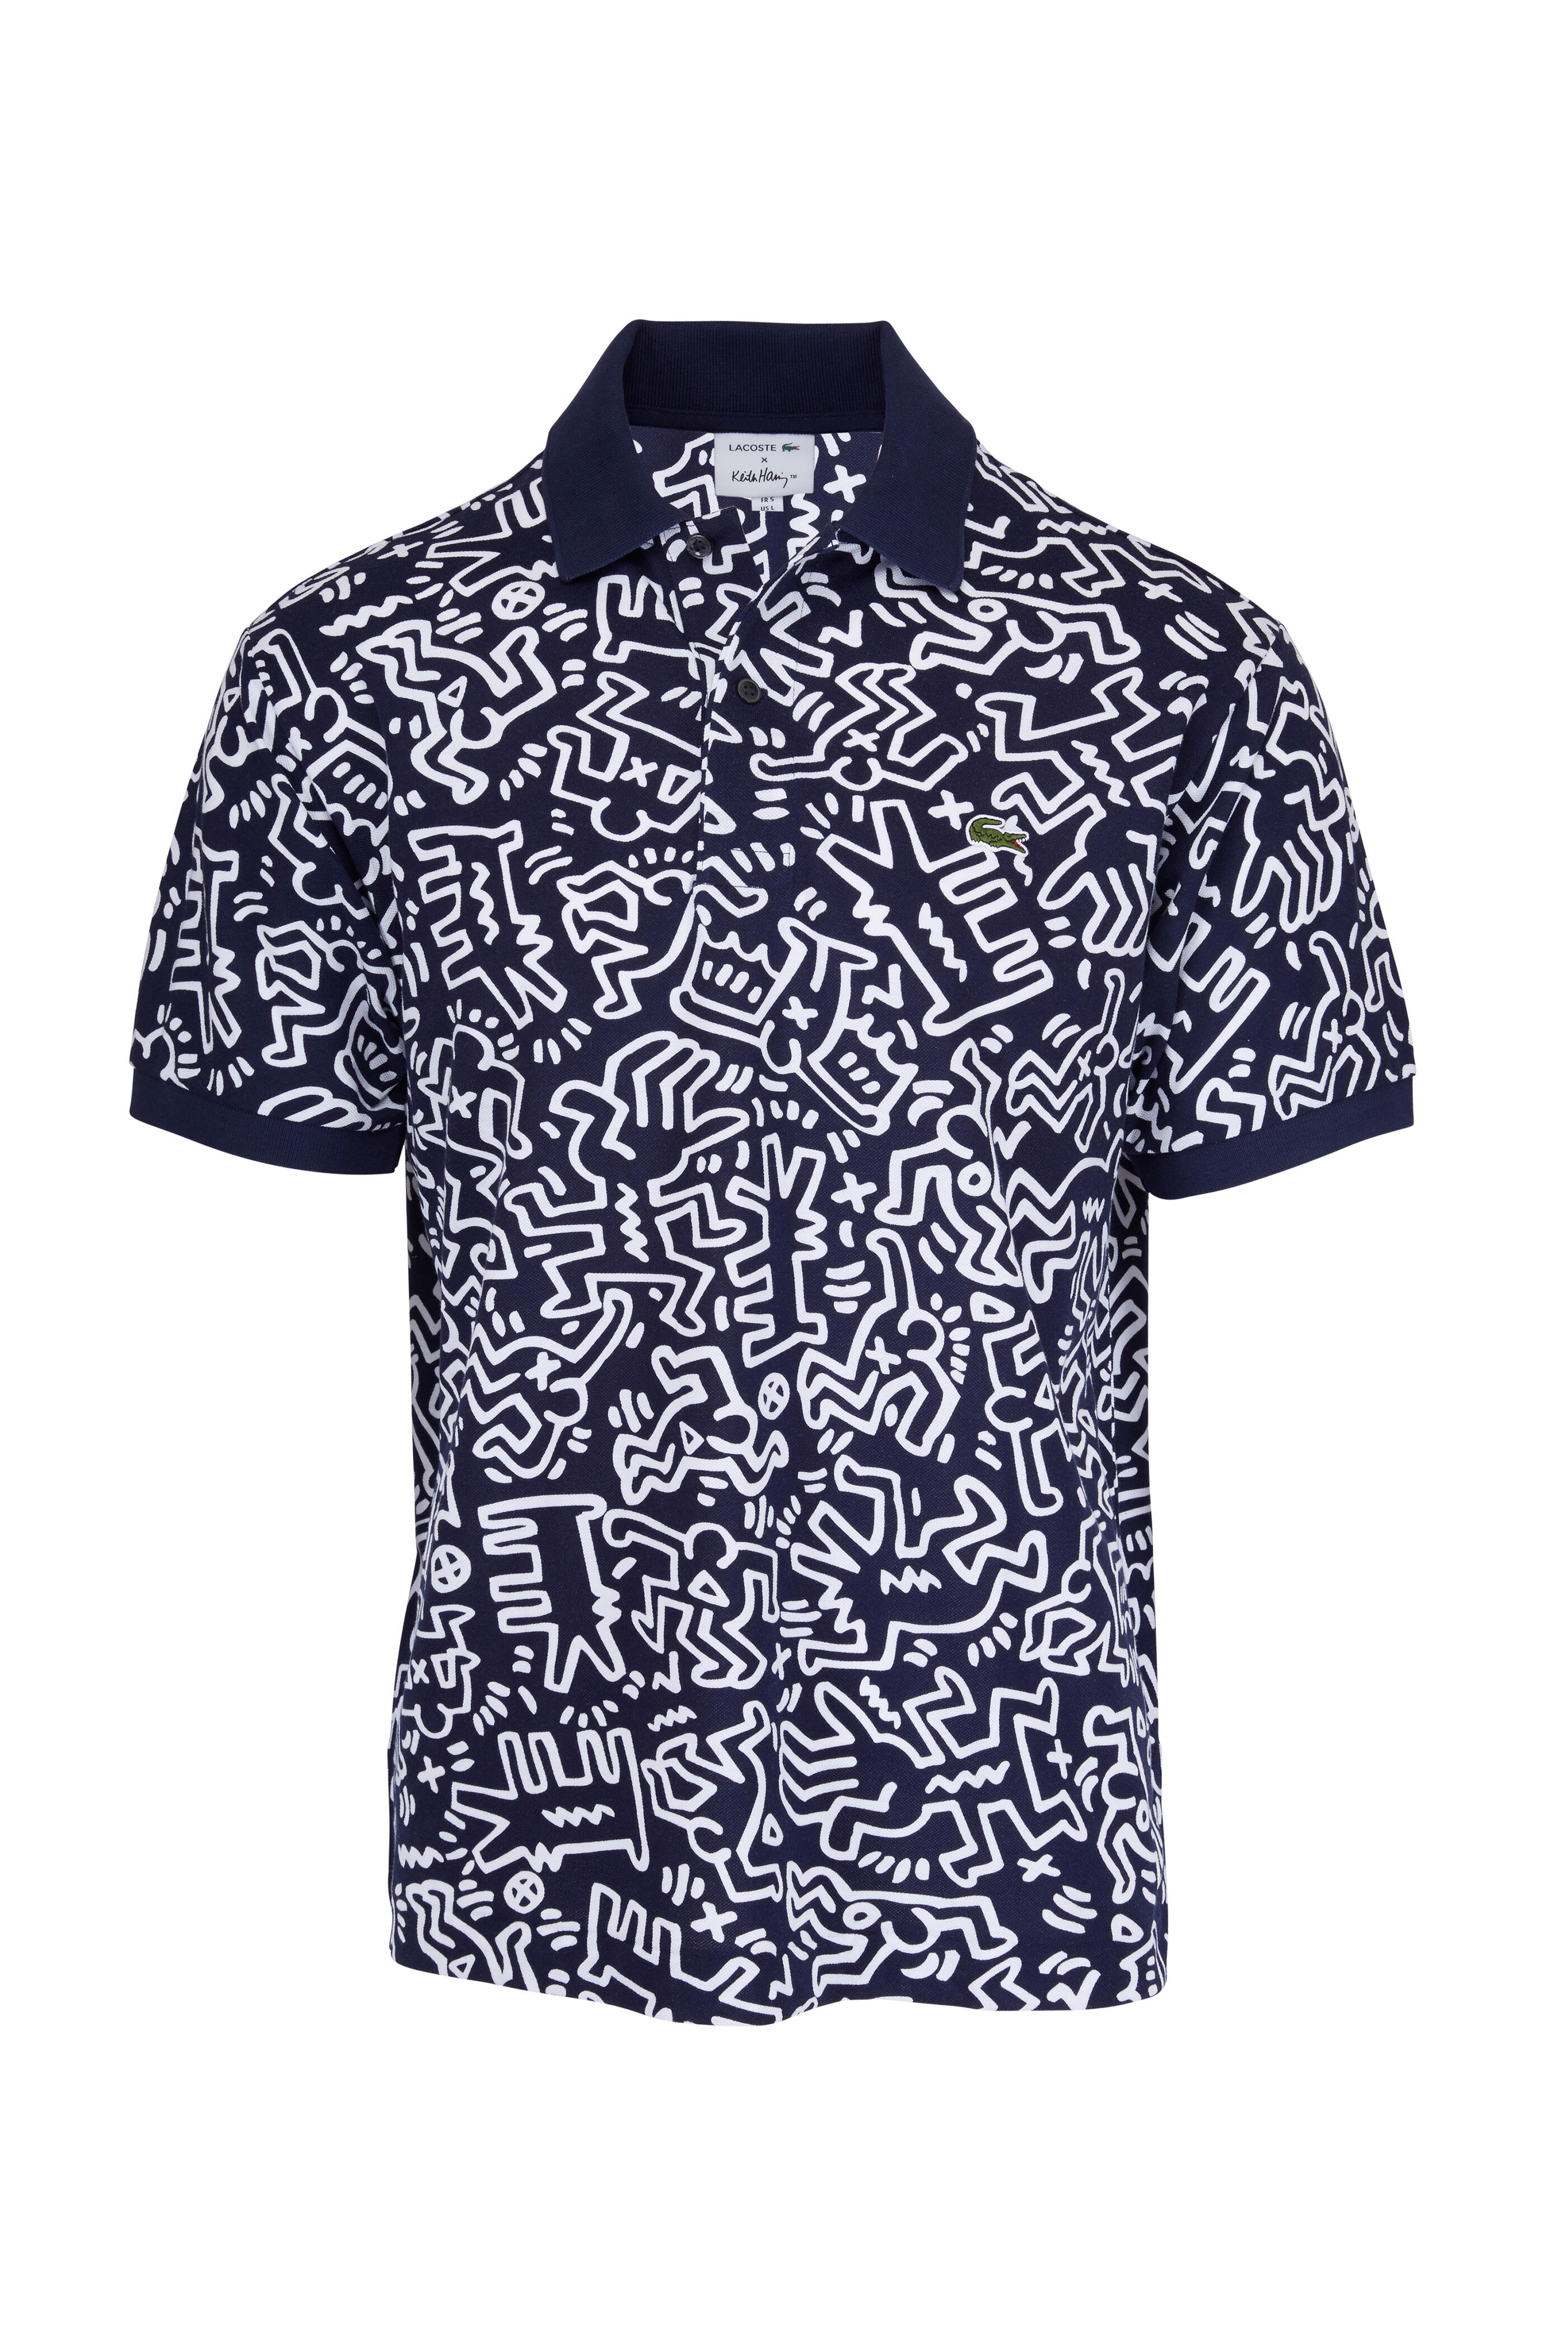 Lacoste x Keith Haring Special Edition All Over Print Polo Croc Logo Shirt  Large